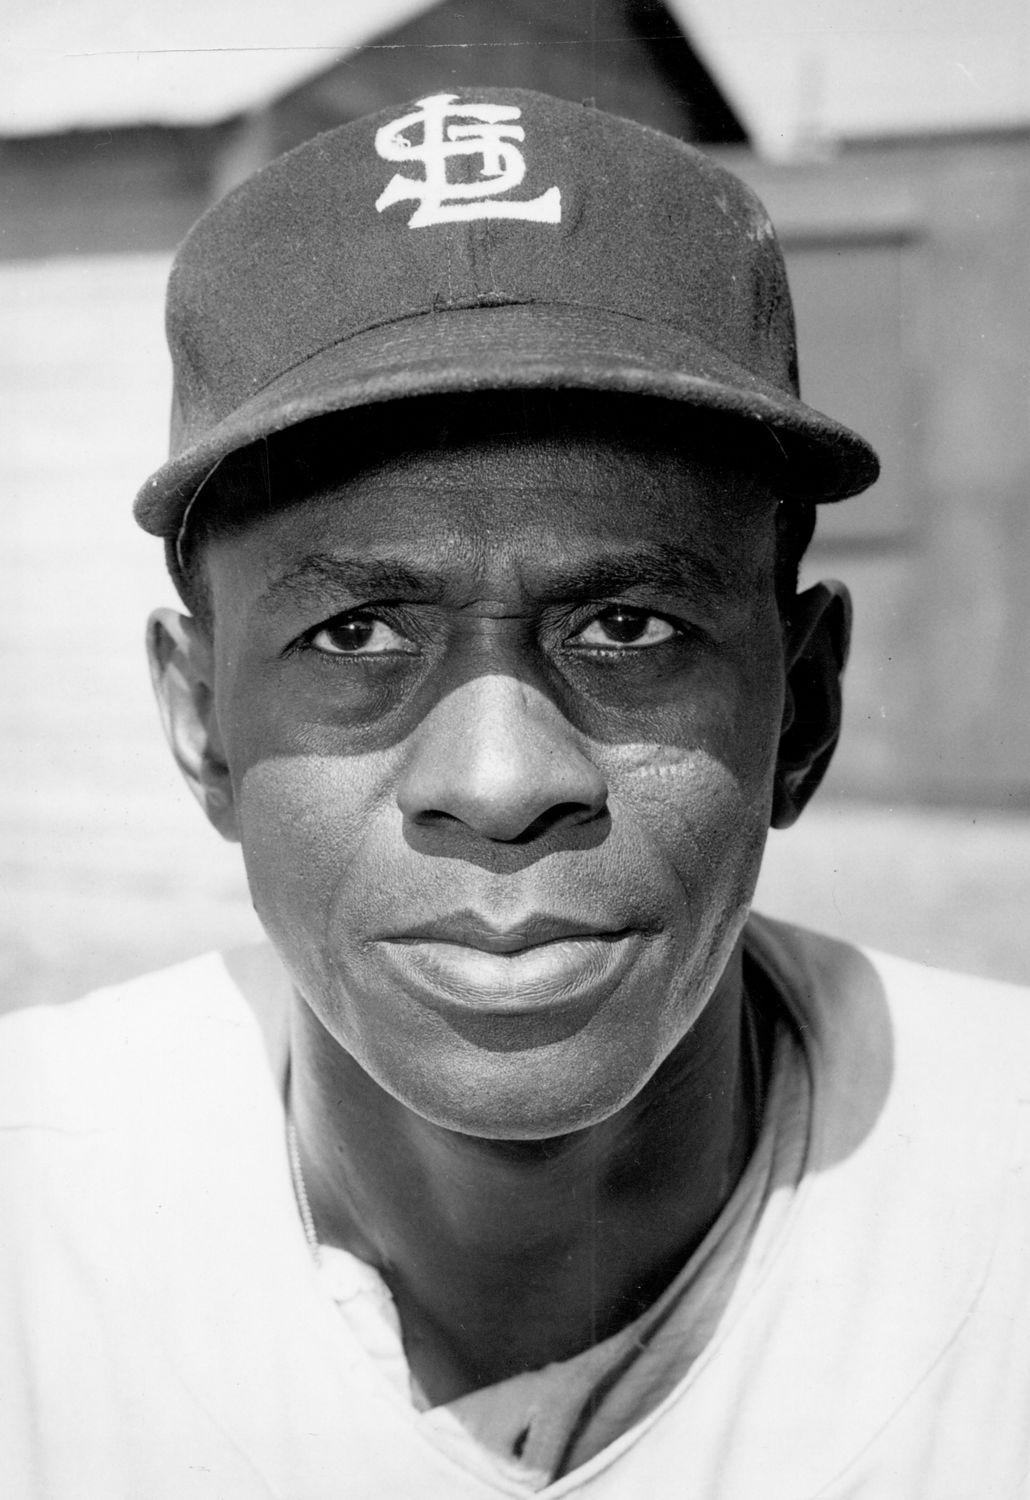 Vintage Photo of the Day: Satchel Paige 1951